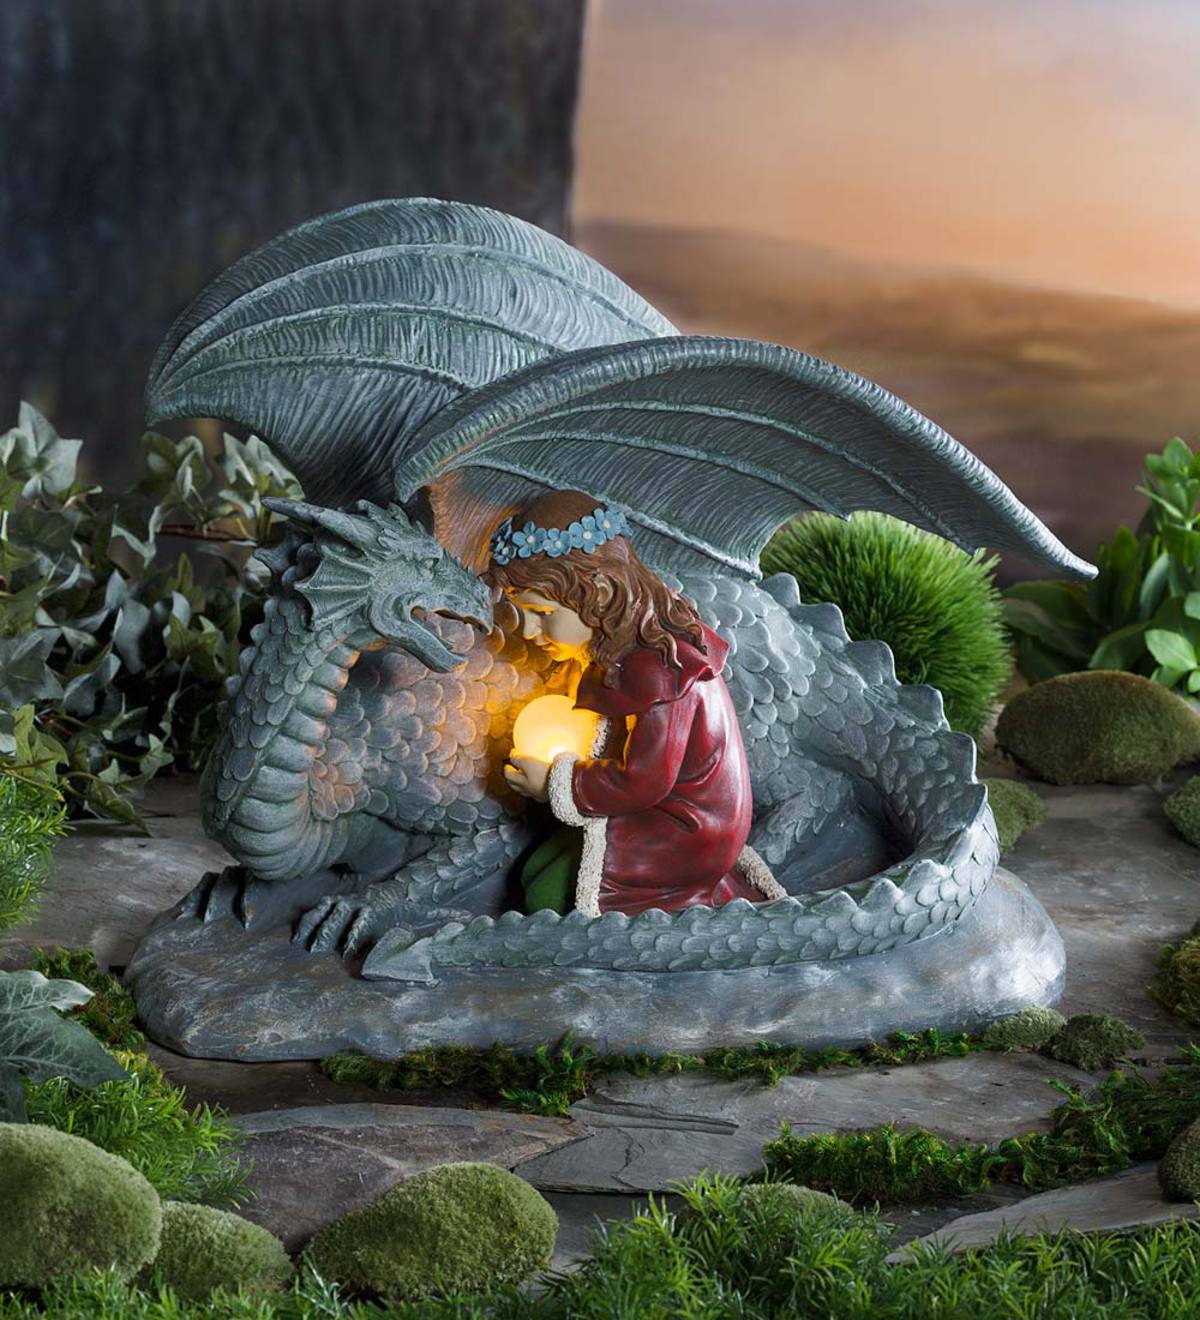 Dragon and Maiden Sculpture